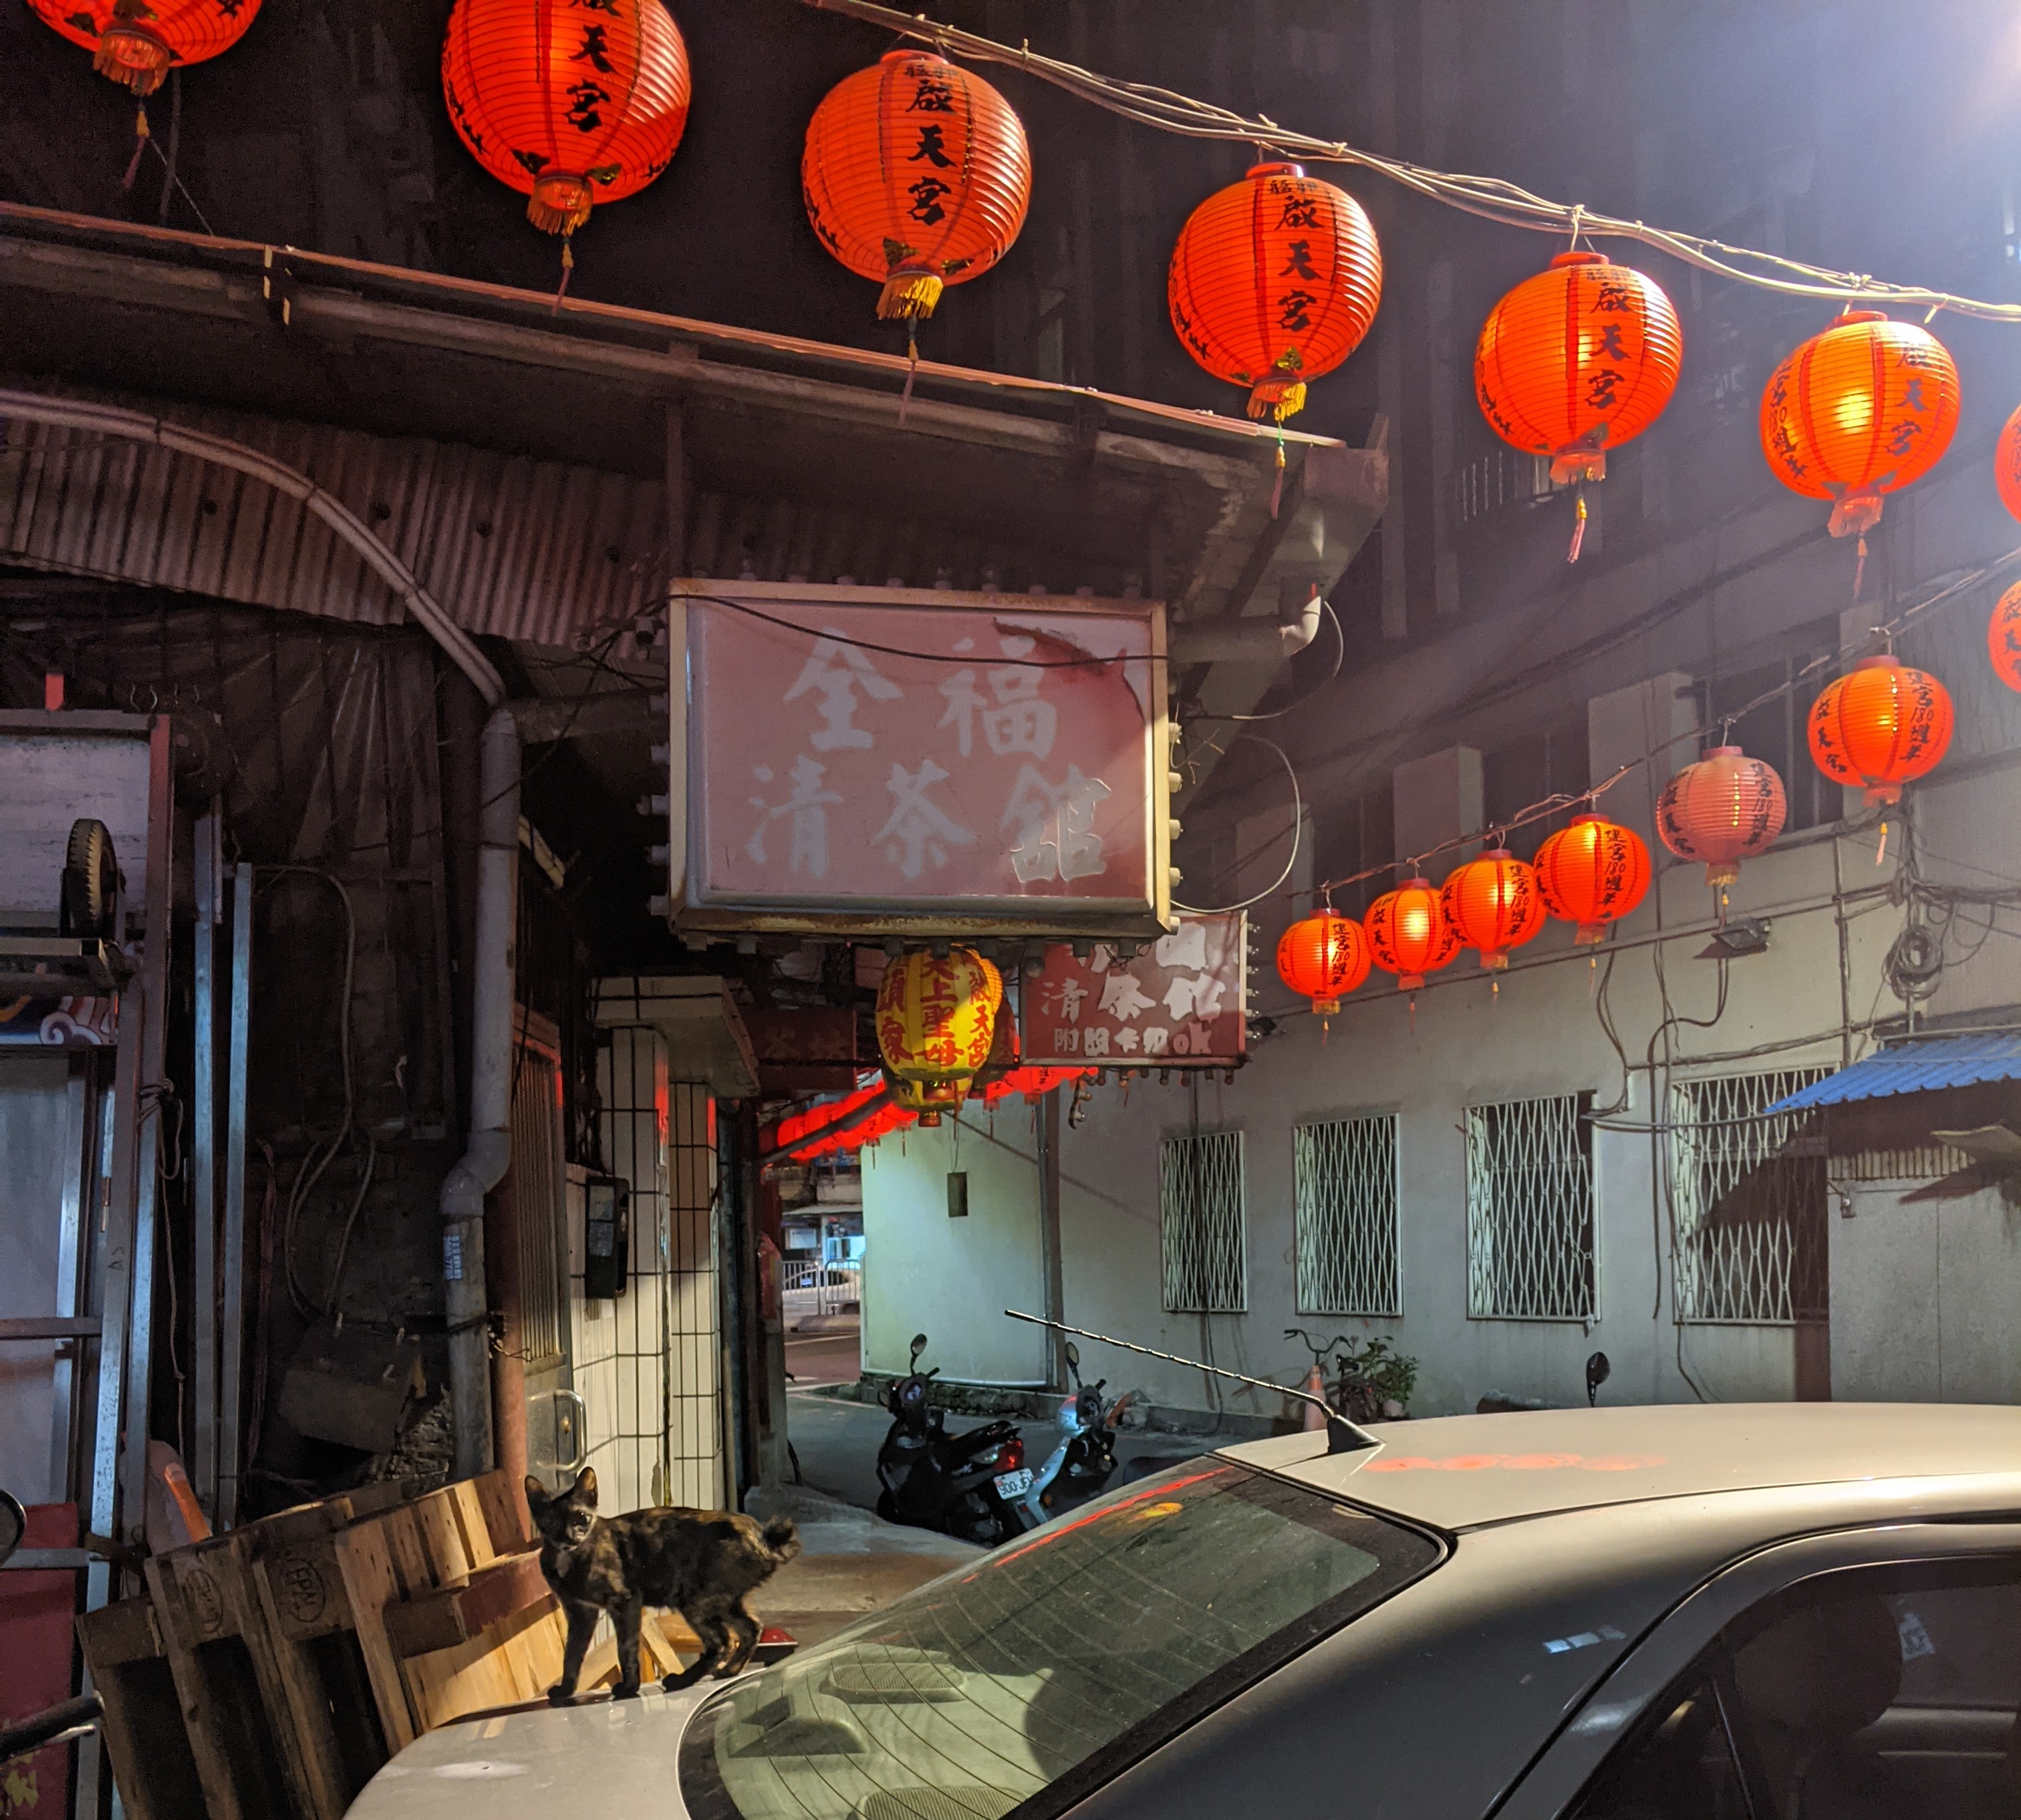 A very small and ratty looking cat standing on a car and looking wary, with some red lanterns strung up above it.